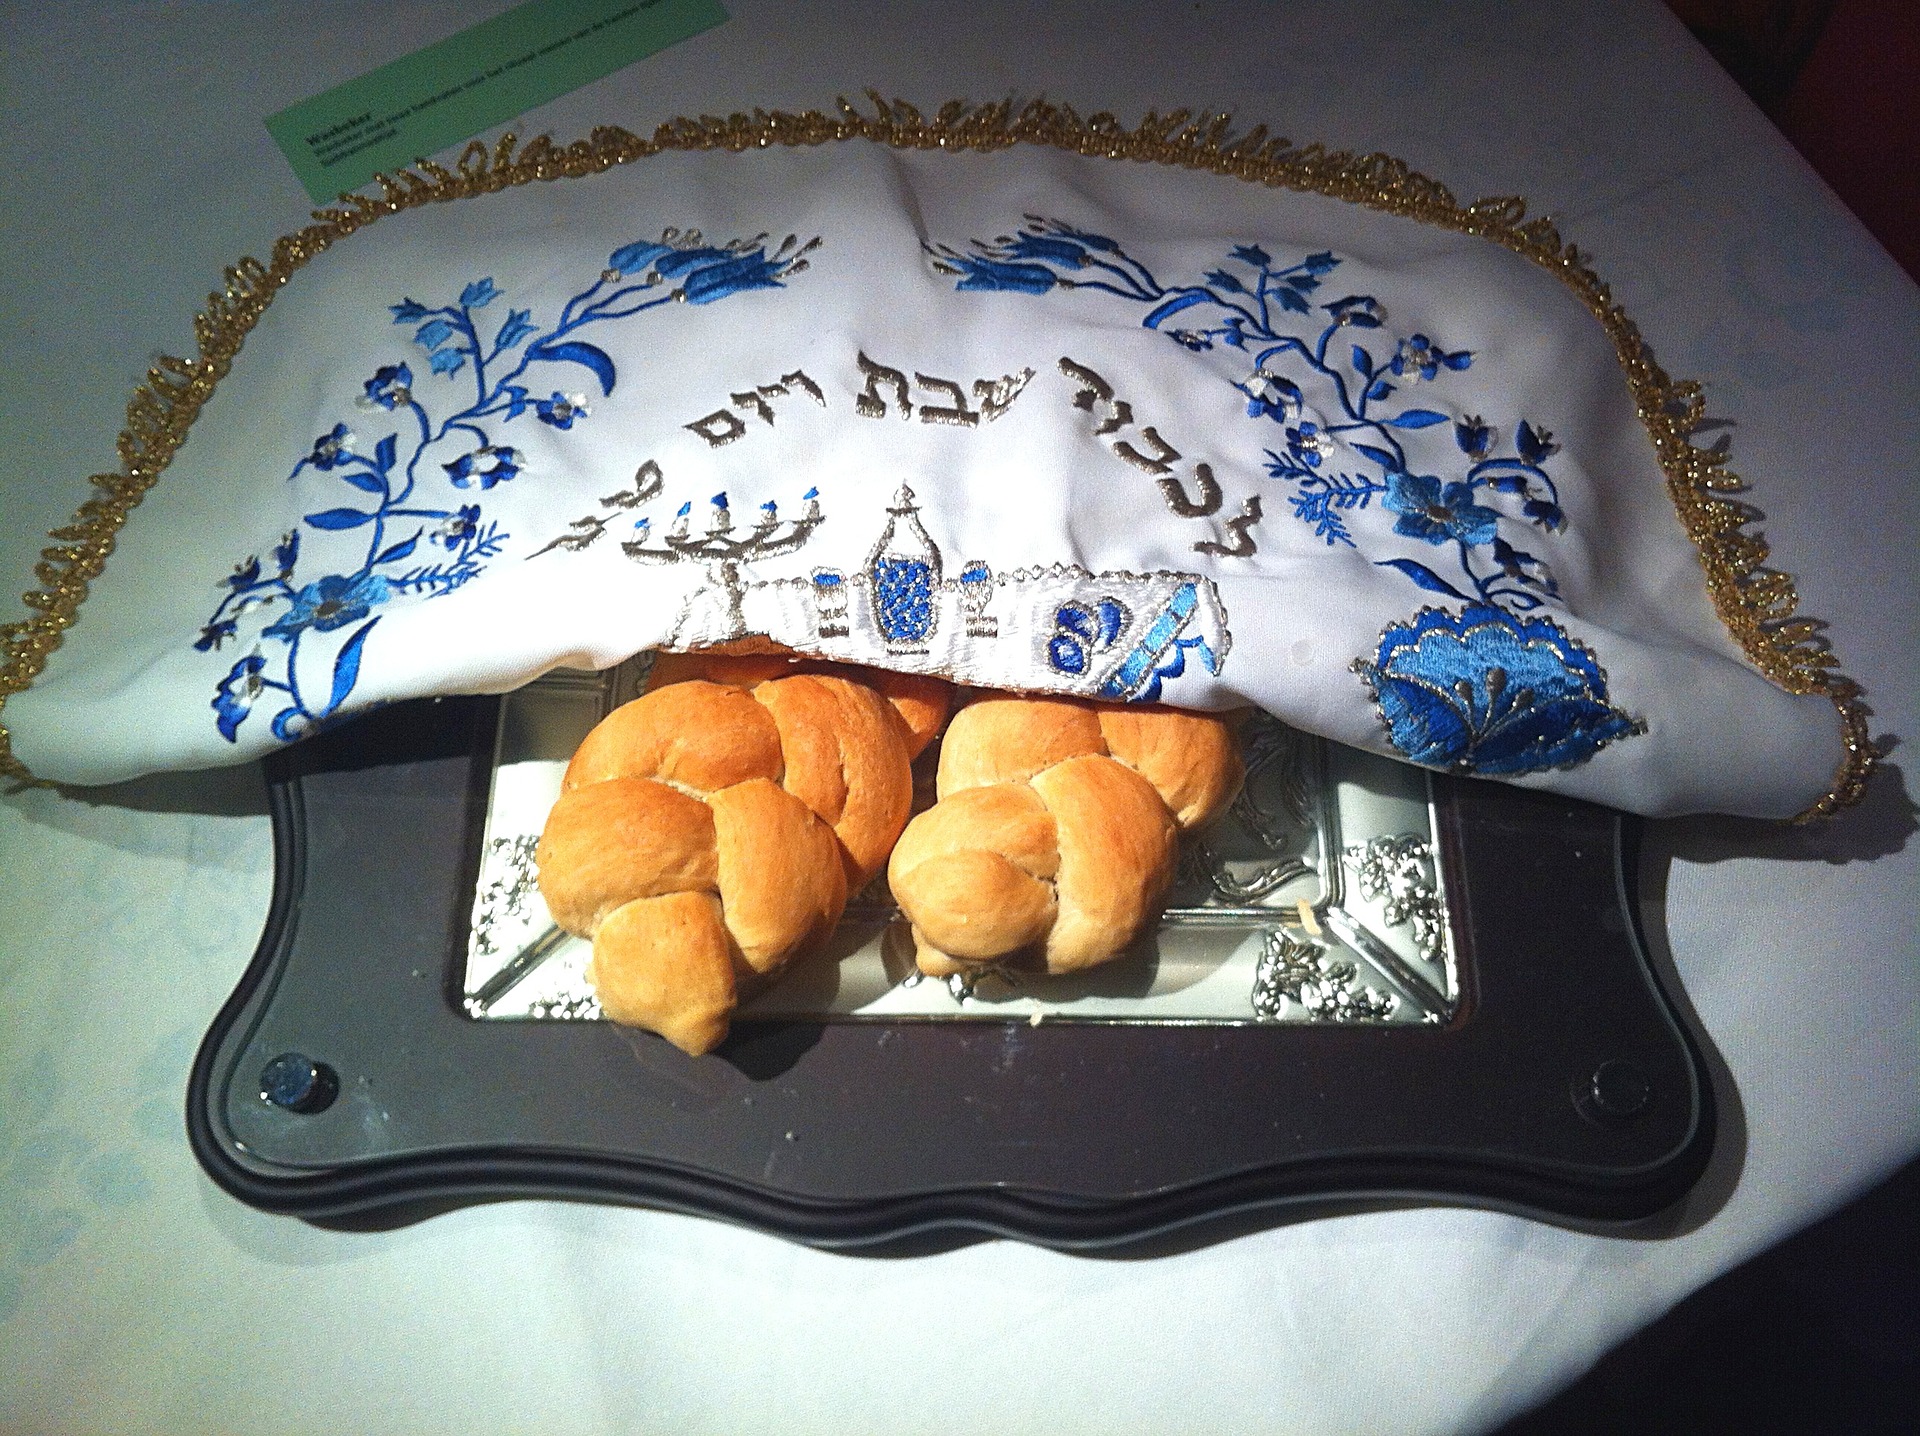 Introduction to the Blessing over the Bread